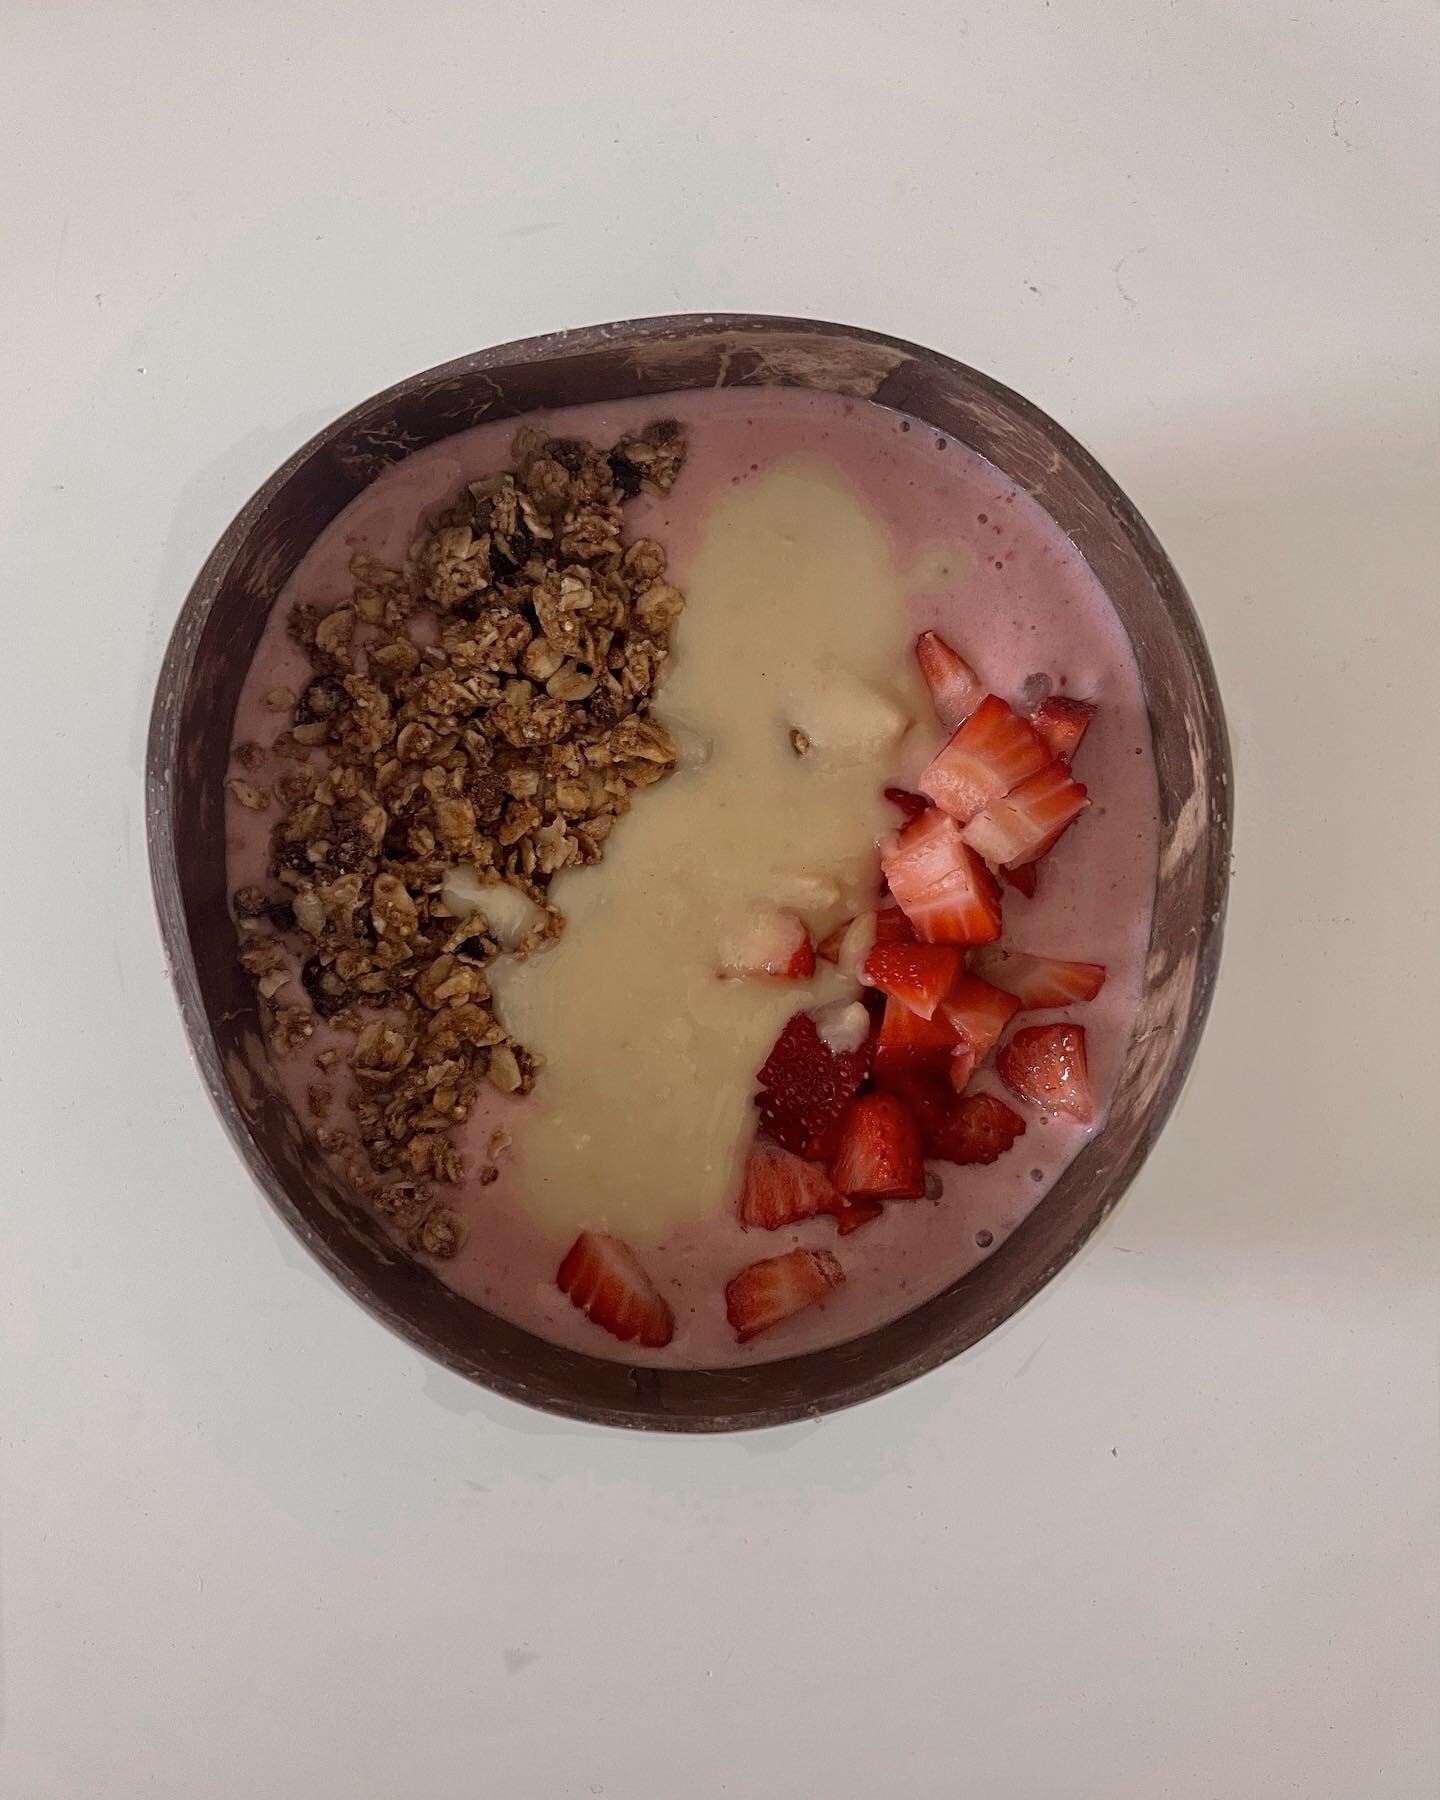 Getting back into my smoothie bowl era now that the summer months are approaching

So many new smoothie bowl recipes coming soon!

Base:
-banana
-frozen strawberries 
-@truvani vanilla plant protein 
-splash of almond milk 

Toppings:
-@purely_elizab